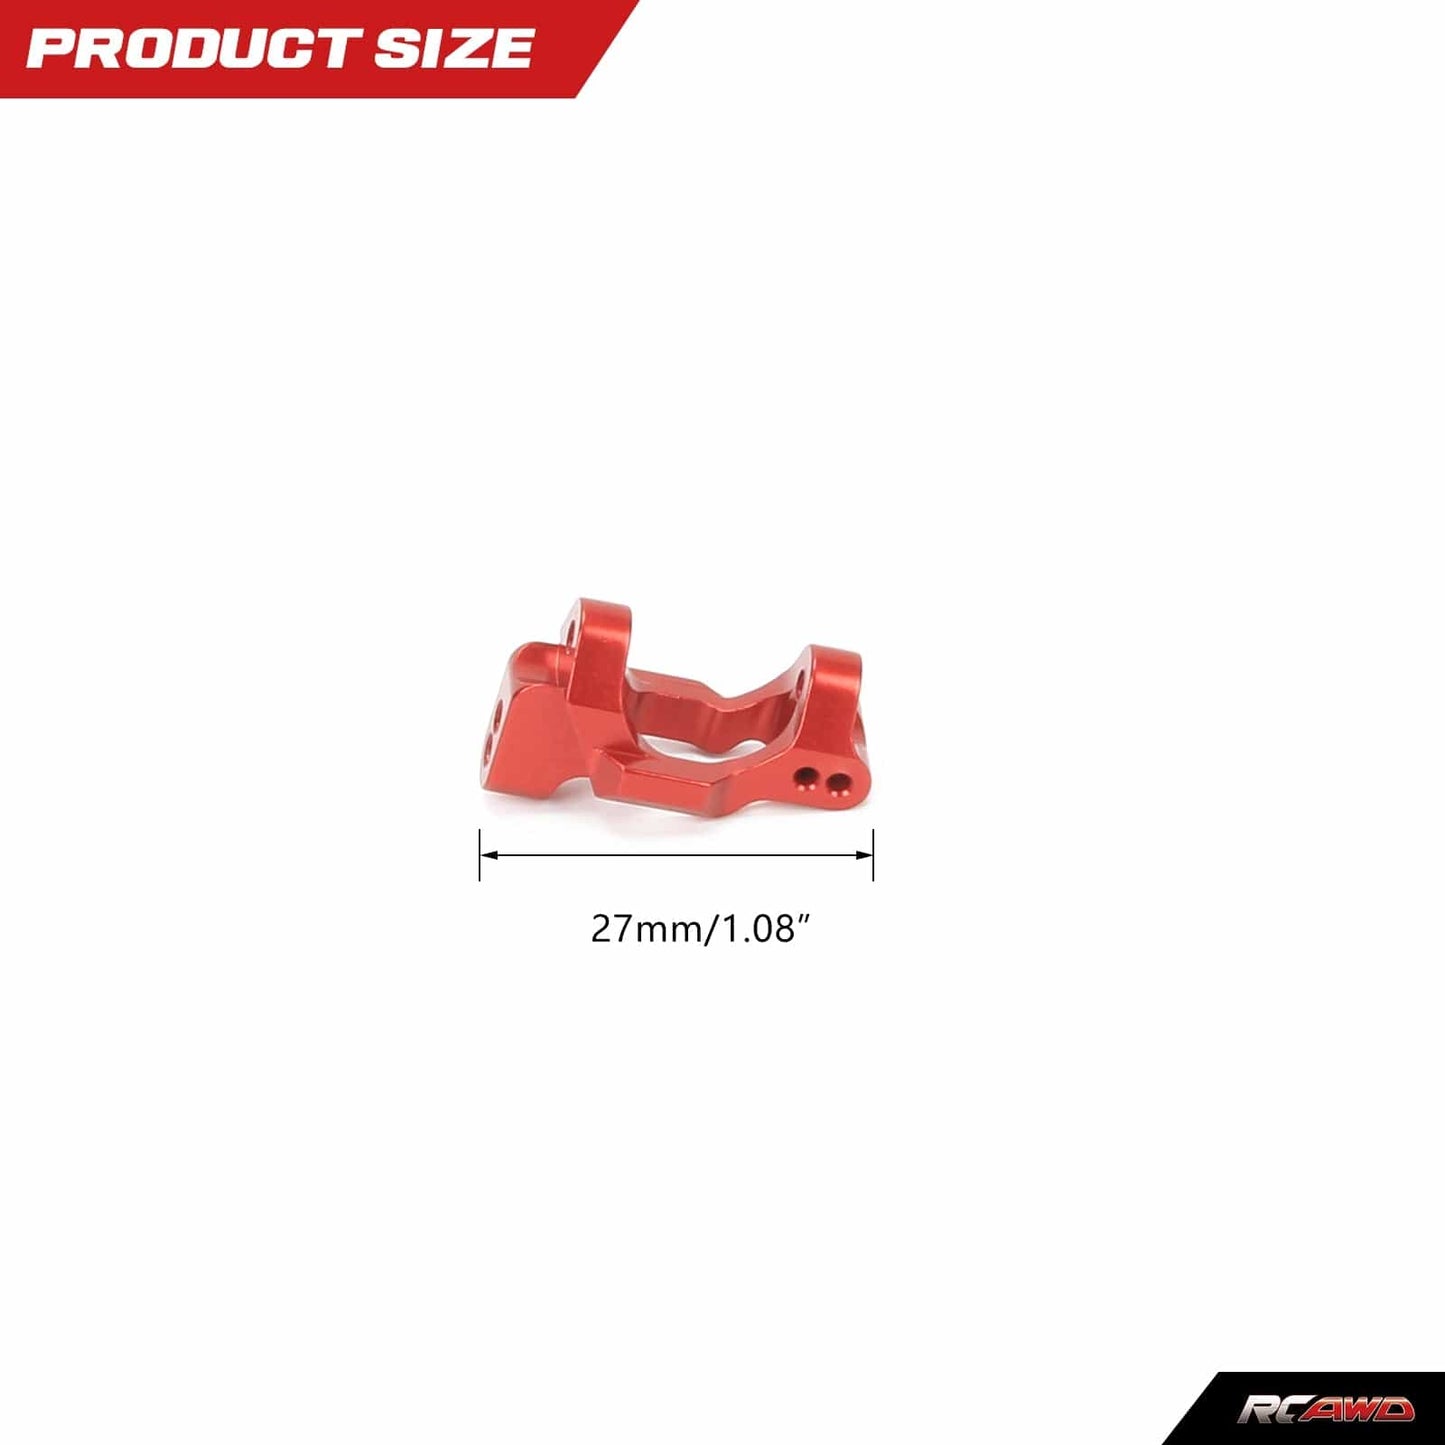 RCAWD TRAXXAS SLASH RCAWD RC Aluminum Caster blocks (c-hubs) 2pcs for 1/18 Traxxas Upgrade Parts